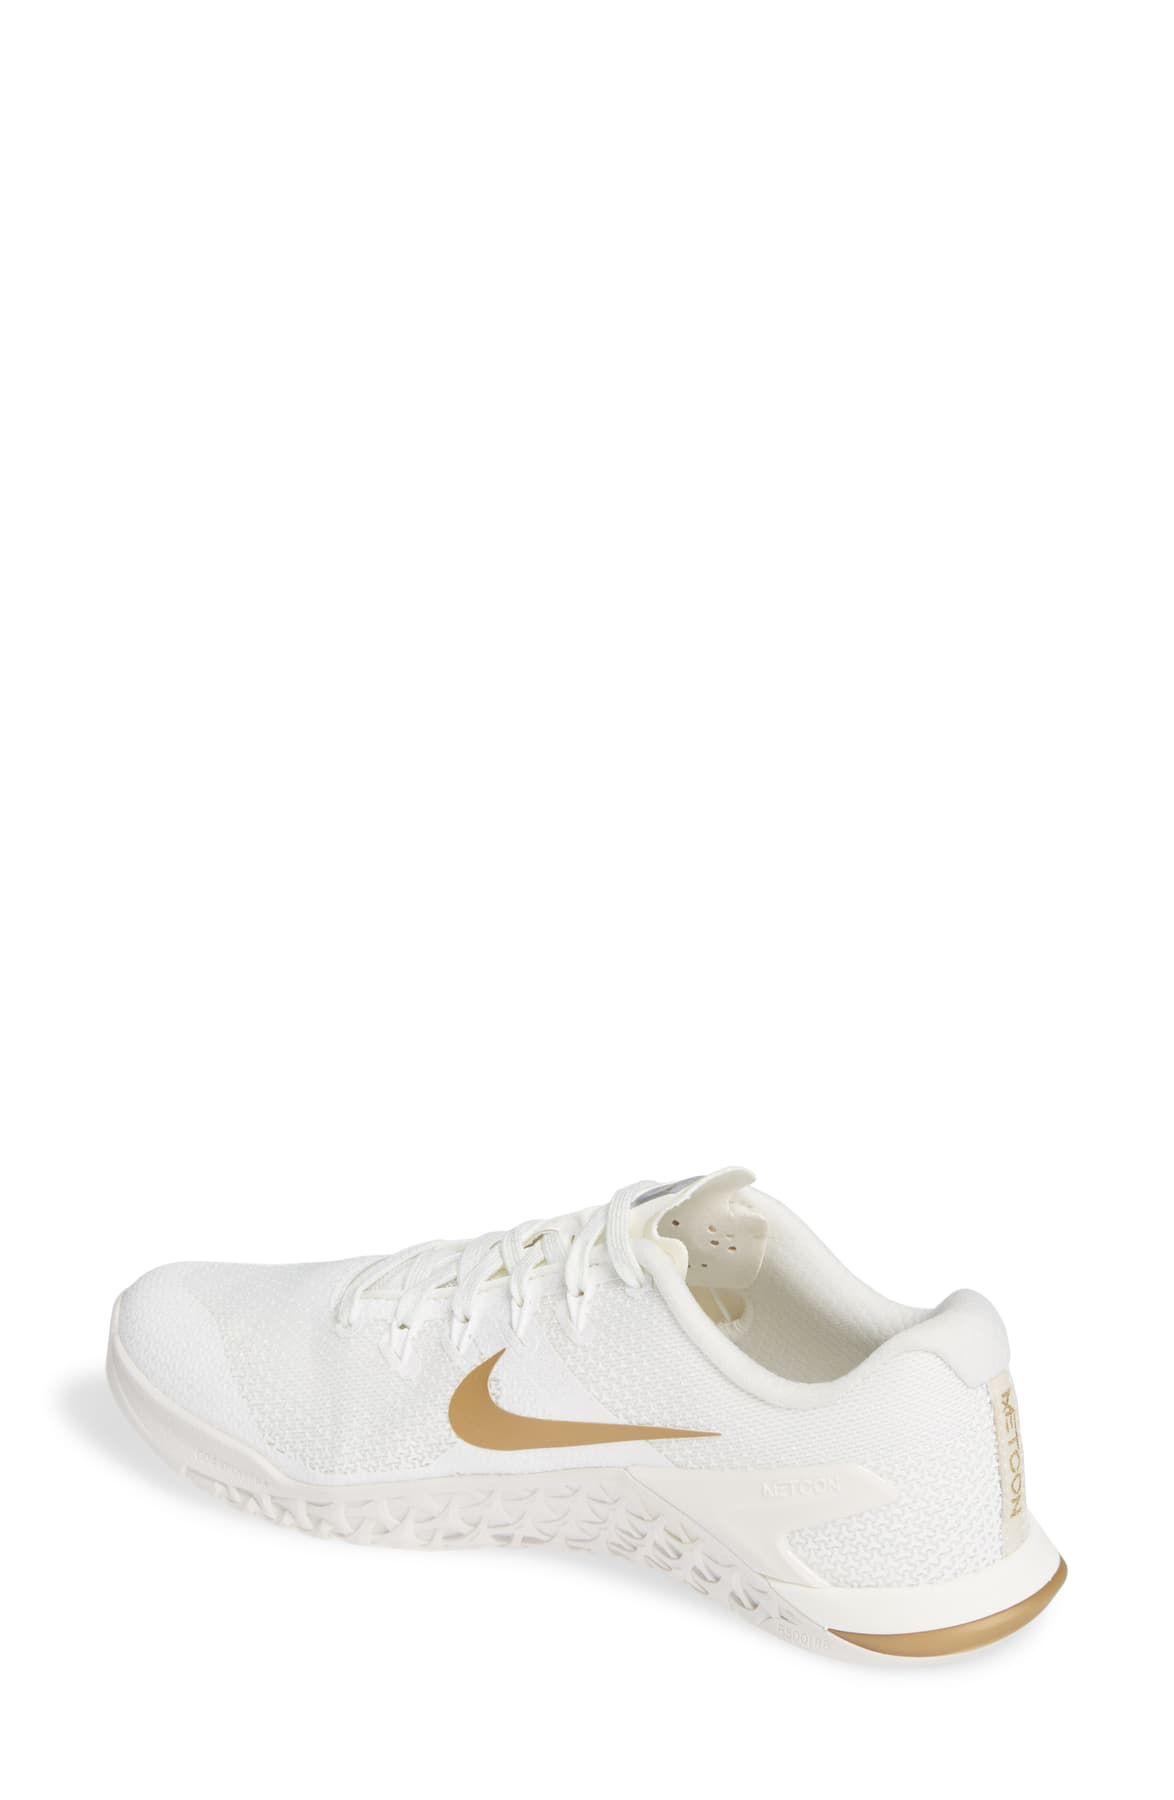 Nike Metcon 4 Champagne Trainers in White | Lyst